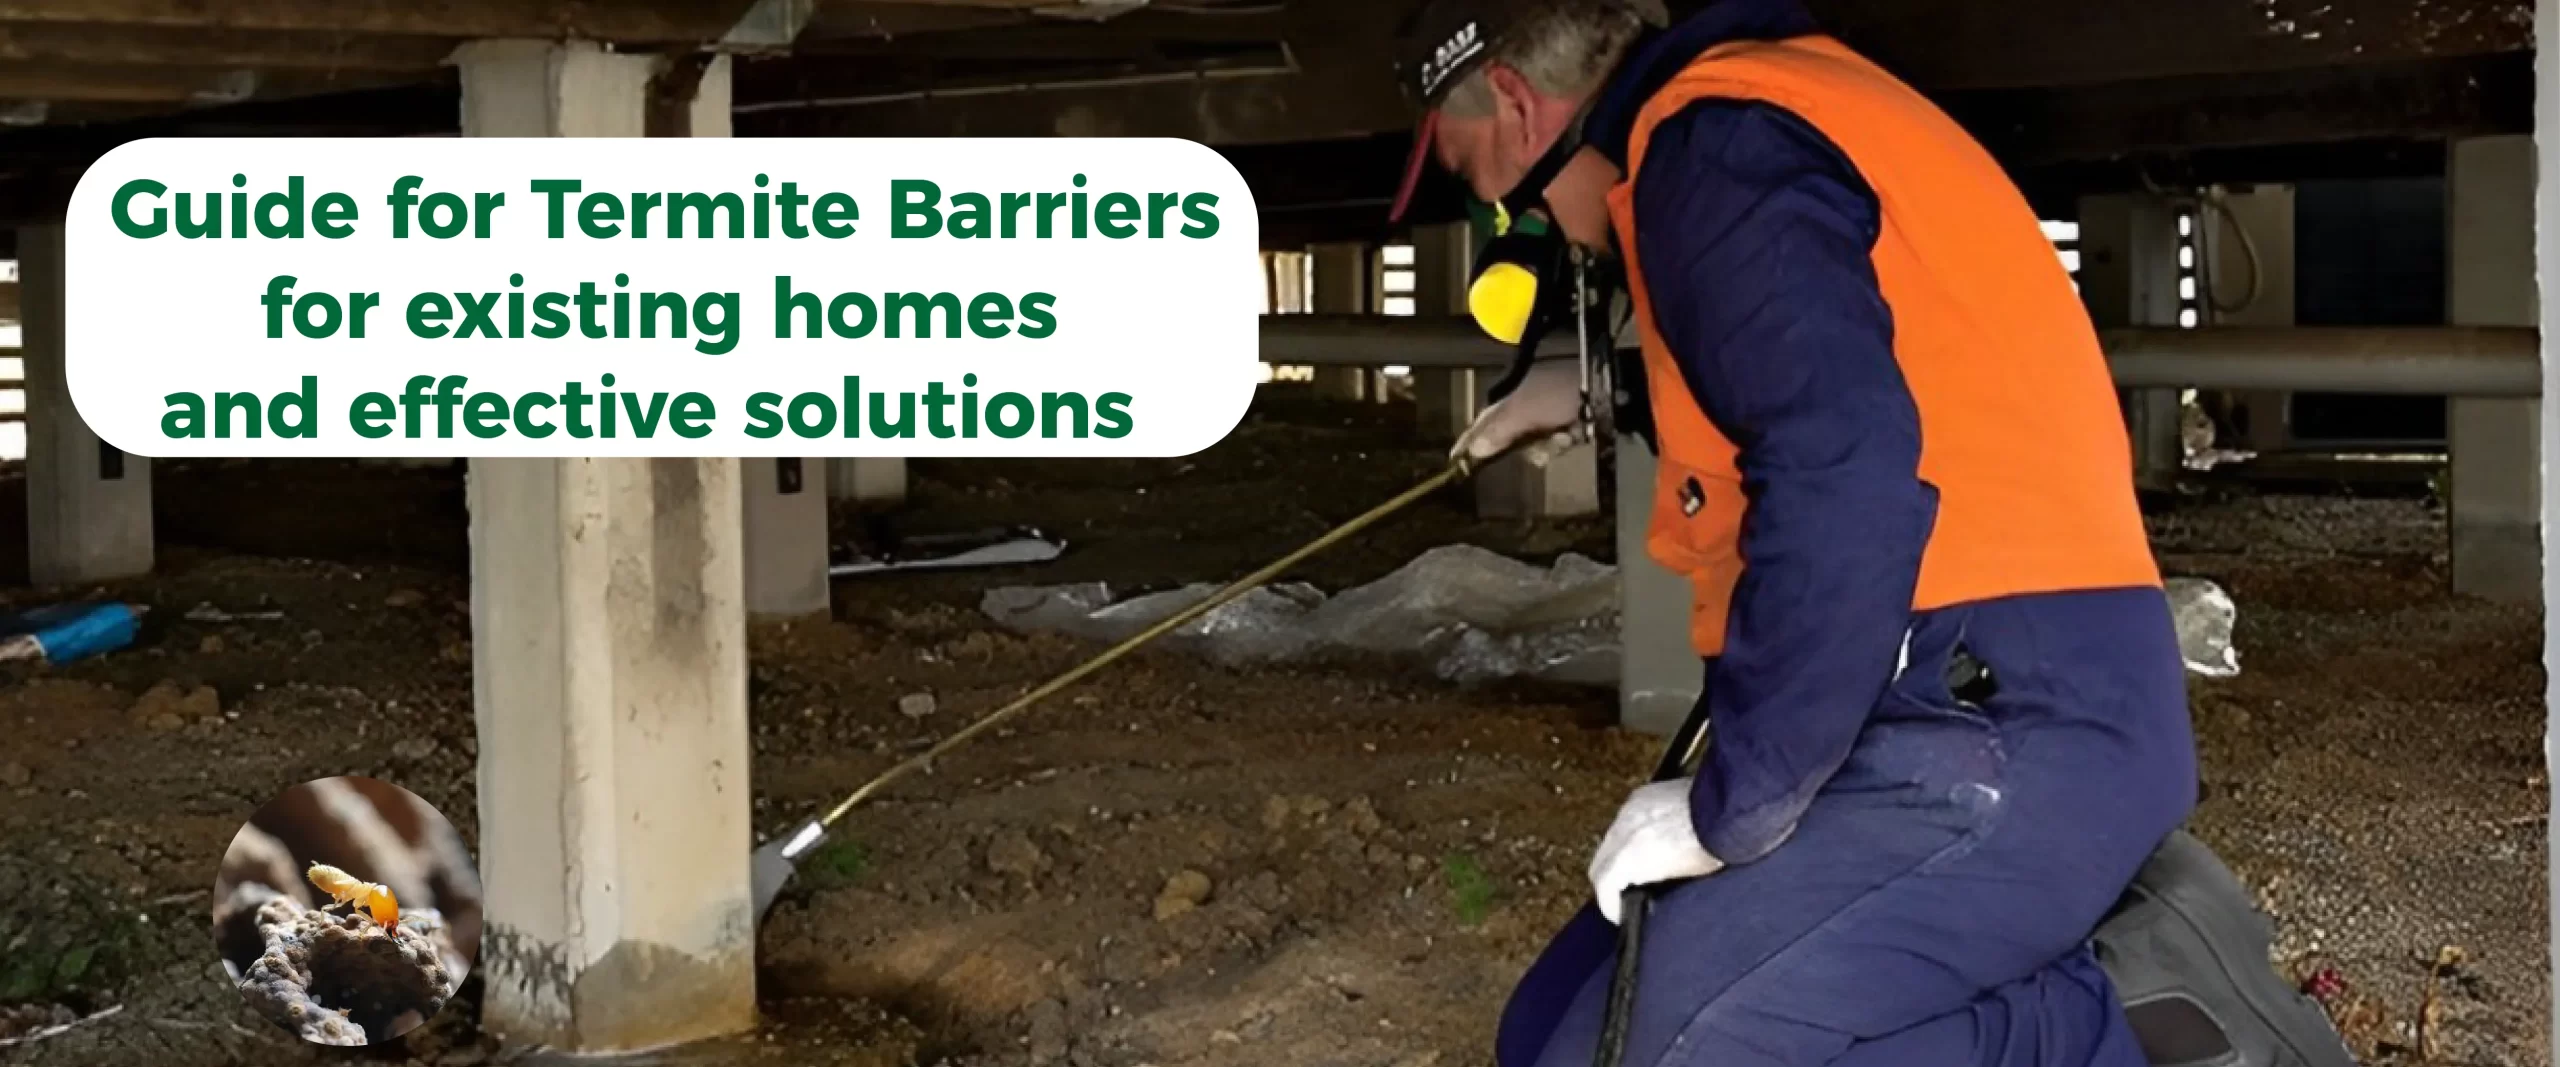 Termite barriers and effective solution